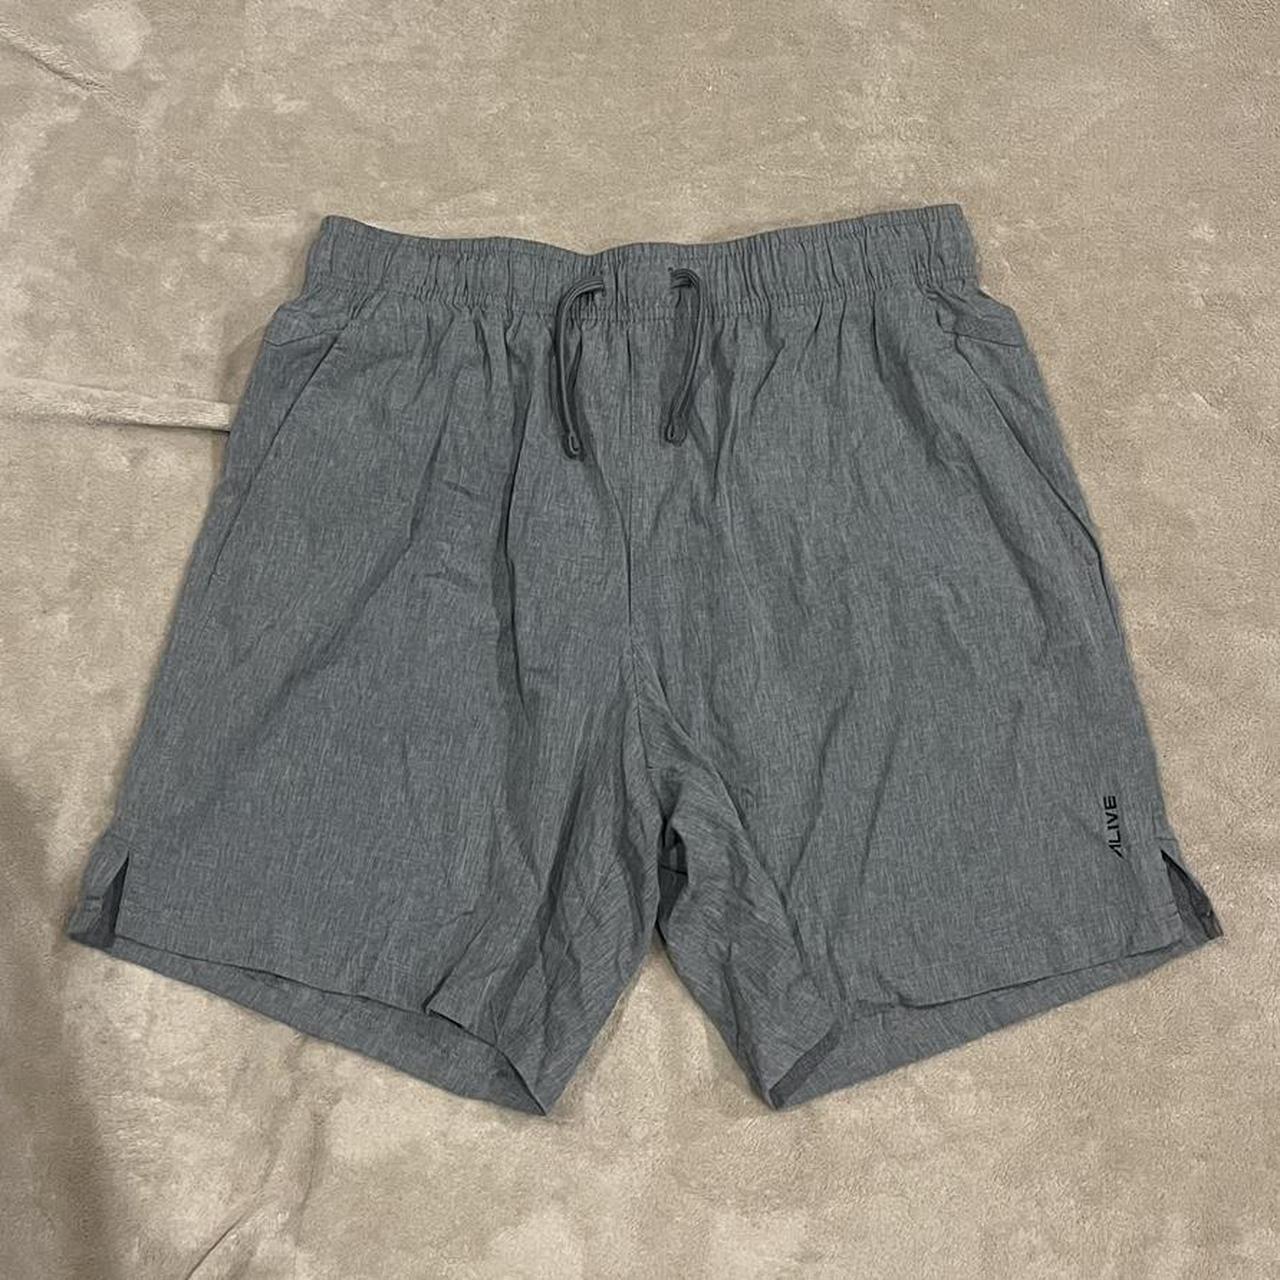 WORK OUT SHORTS - size M - only worn a few times,... - Depop